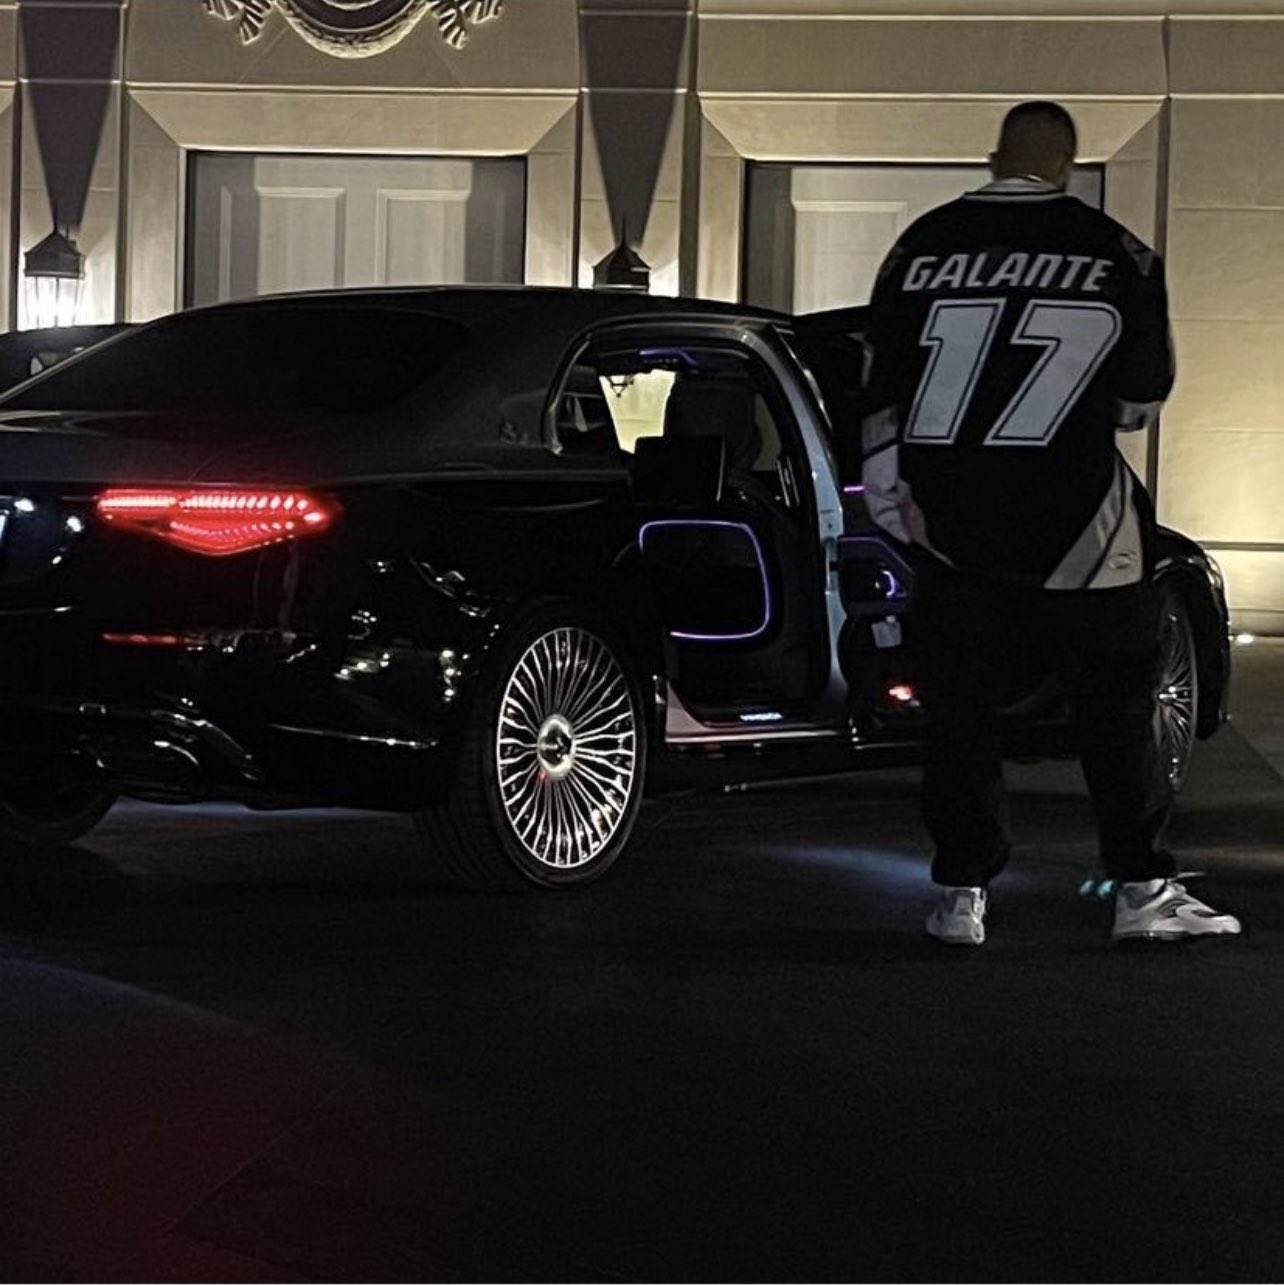 Nasher on X: Drake pulled up with a Danbury Trashers jersey on last night.  Iconic. @Drake  / X